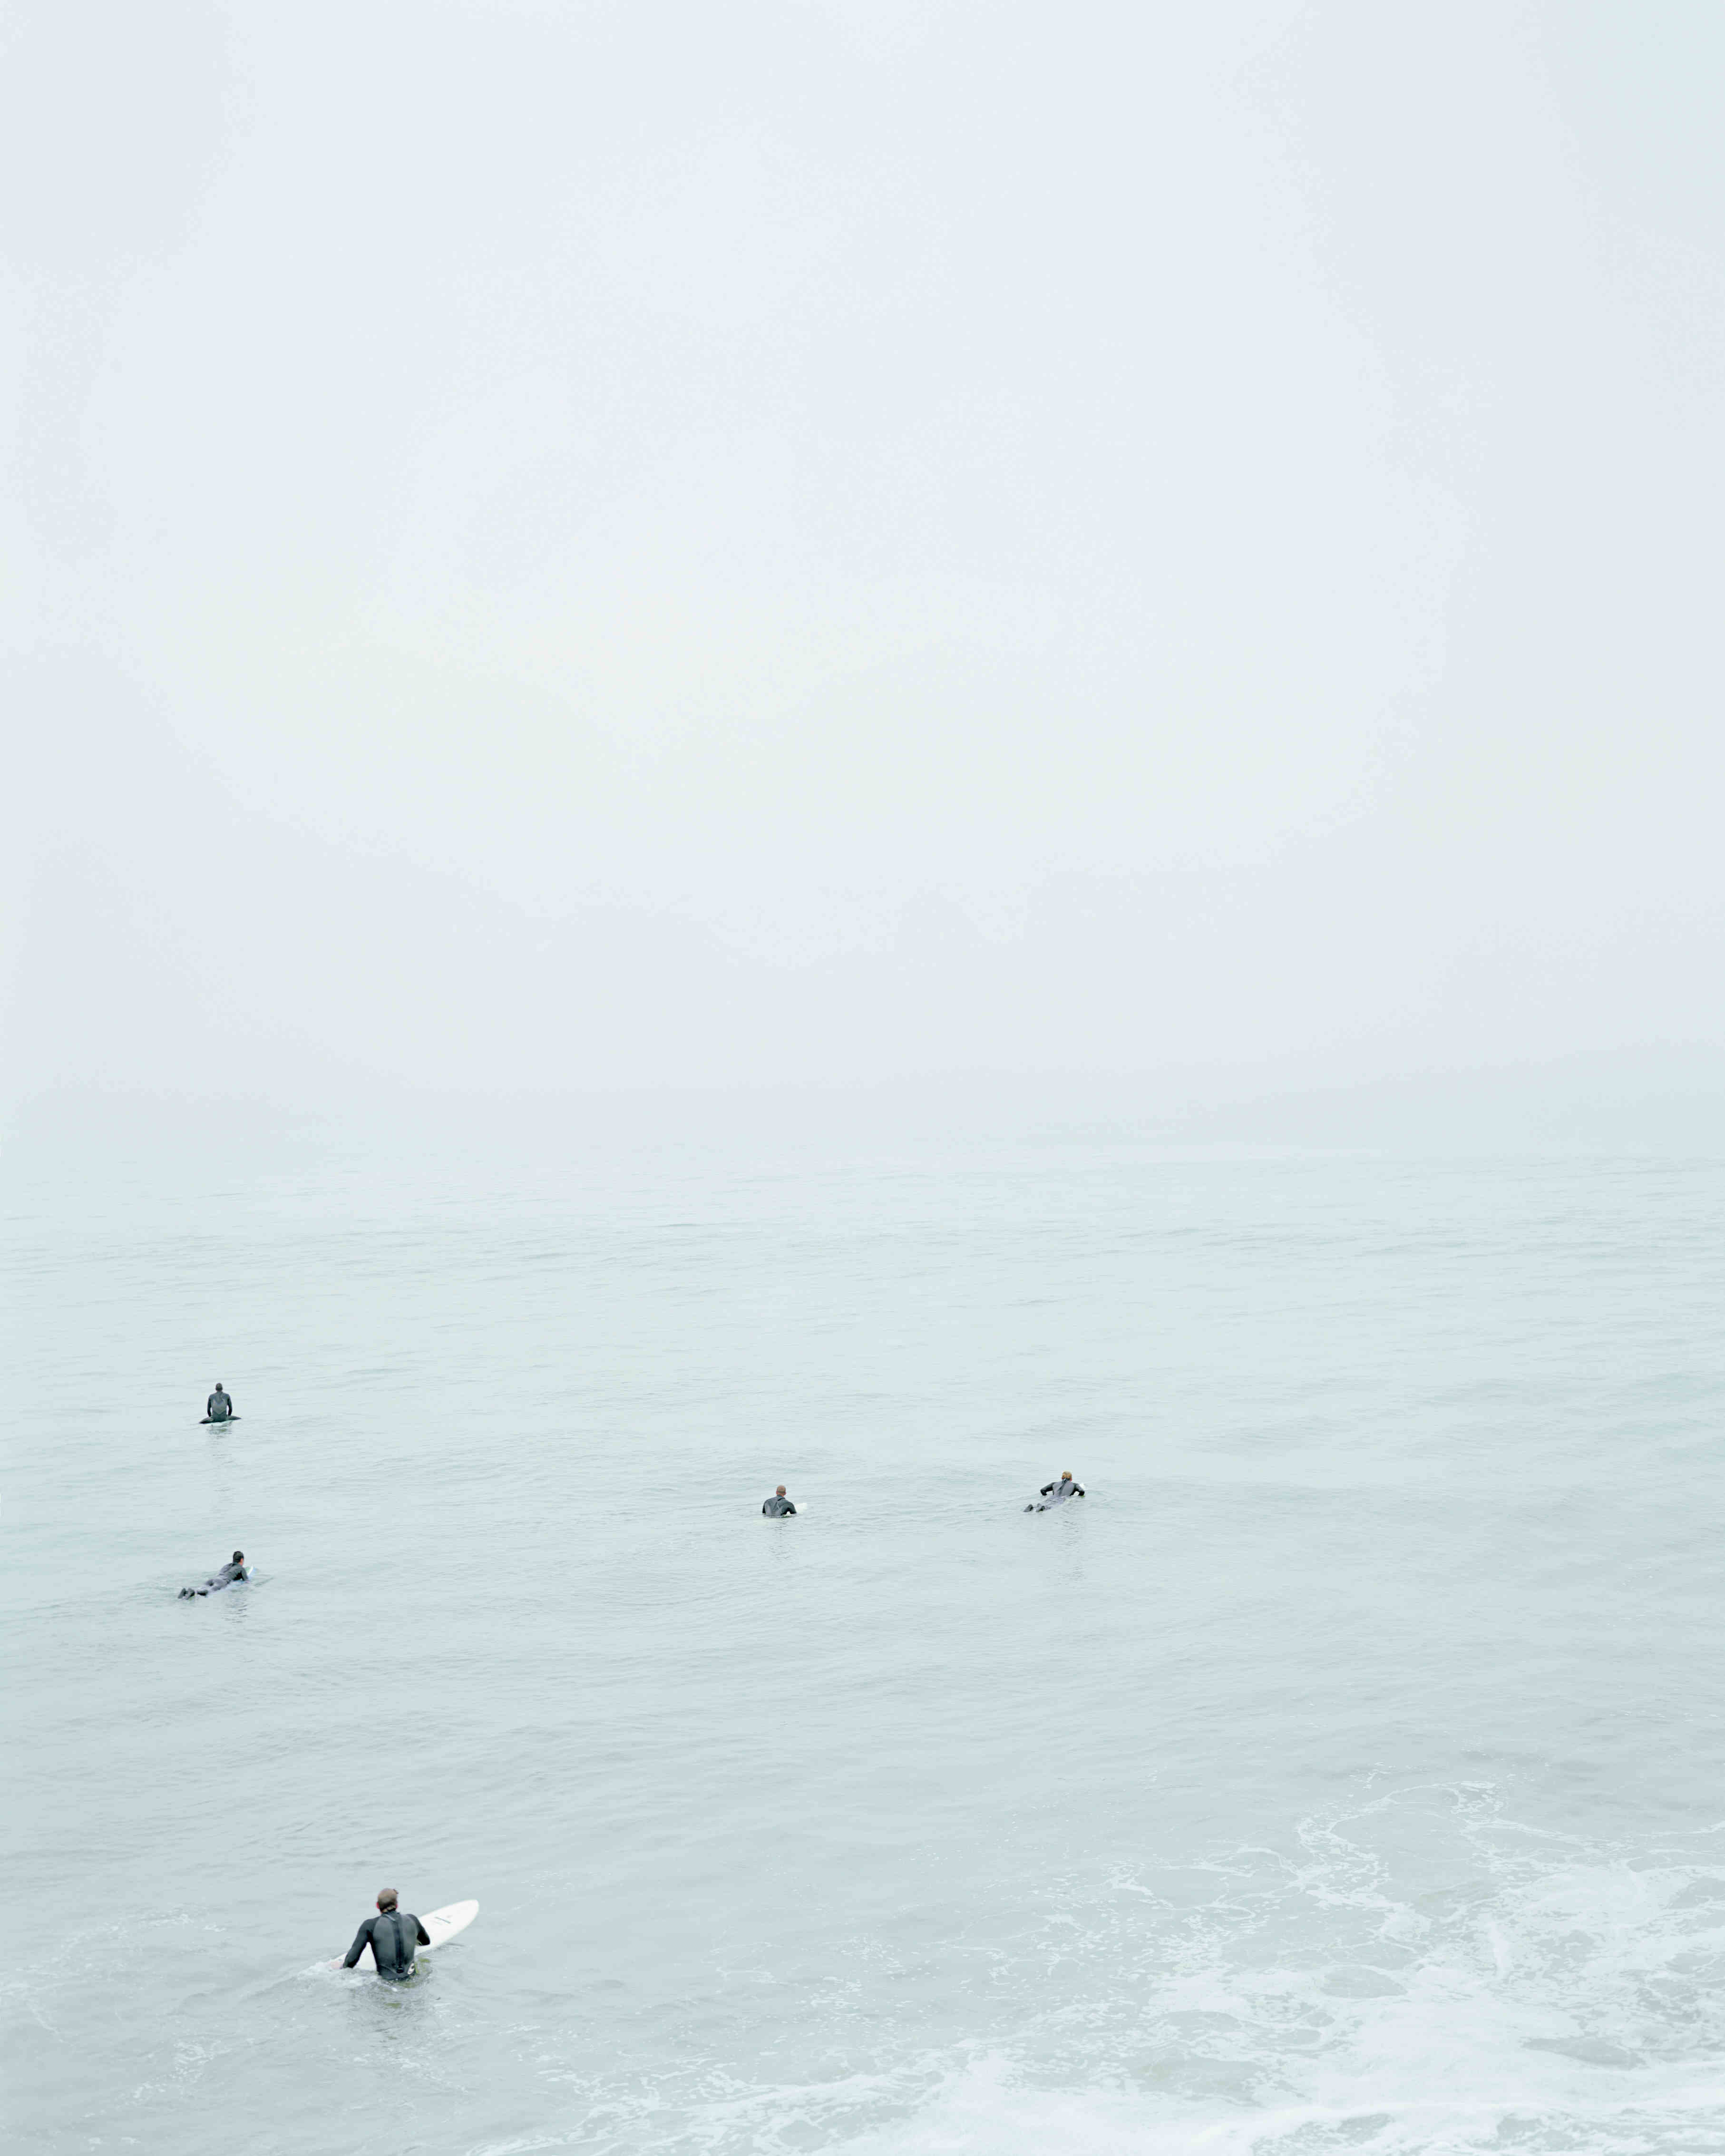 Untitled #4 (Surfers), 2009. Chromogenic print, 50 × 40 in. (127 × 101.6 cm). Picture credit: courtesy the artist and Regen Projects, Los Angeles; Lehmann Maupin, New York/Hong Kong/Seoul/London; Thomas Dane Gallery, London and Naples; and Peder Lund, Oslo. Surfers (2003)